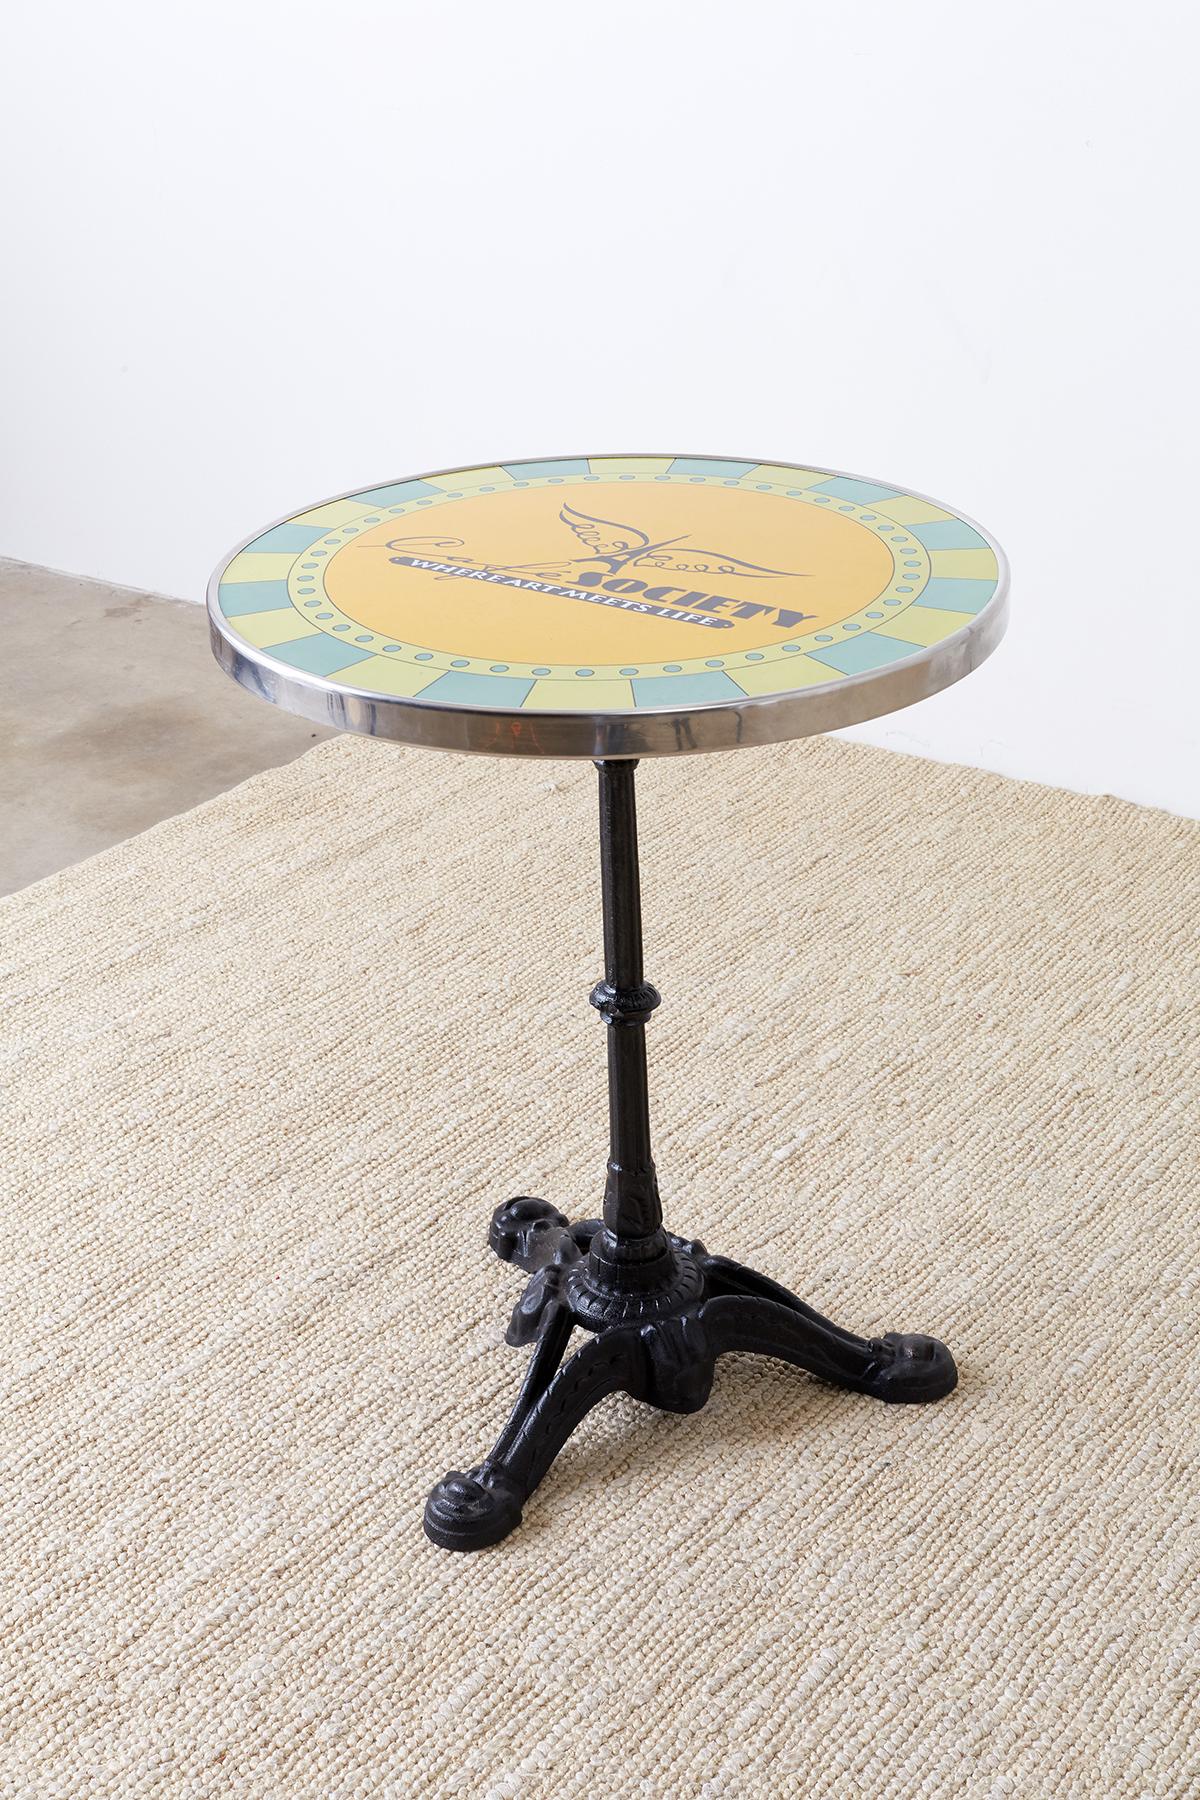 20th Century French Wrought Iron Enamel Top Cafe Bistro Table